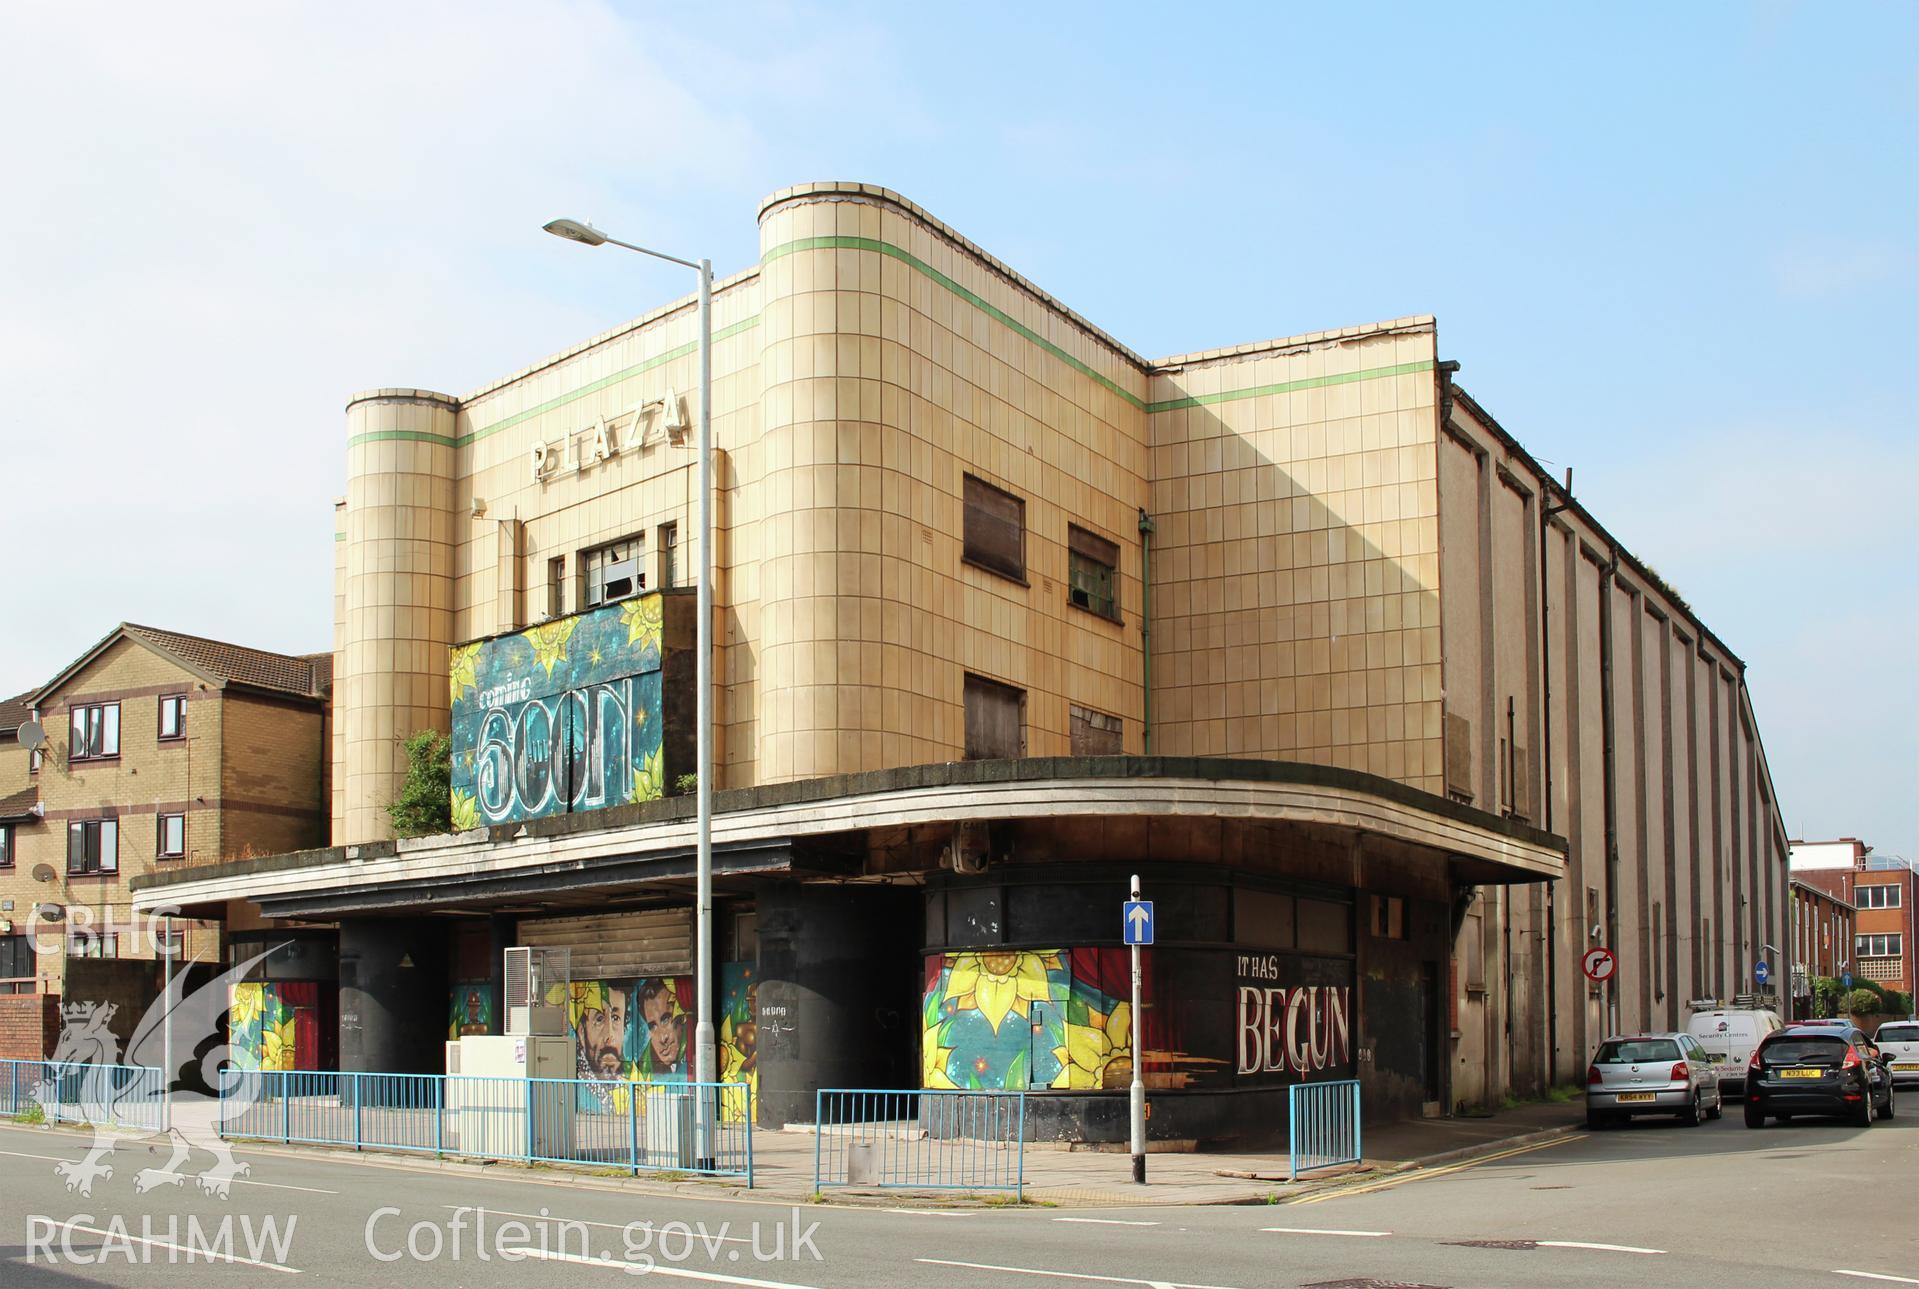 Exterior view of the front and side elevation of Plaza Cinema, Port Talbot. Photographed during survey conducted by Sue Fielding for the RCAHMW, 6th March 2019.